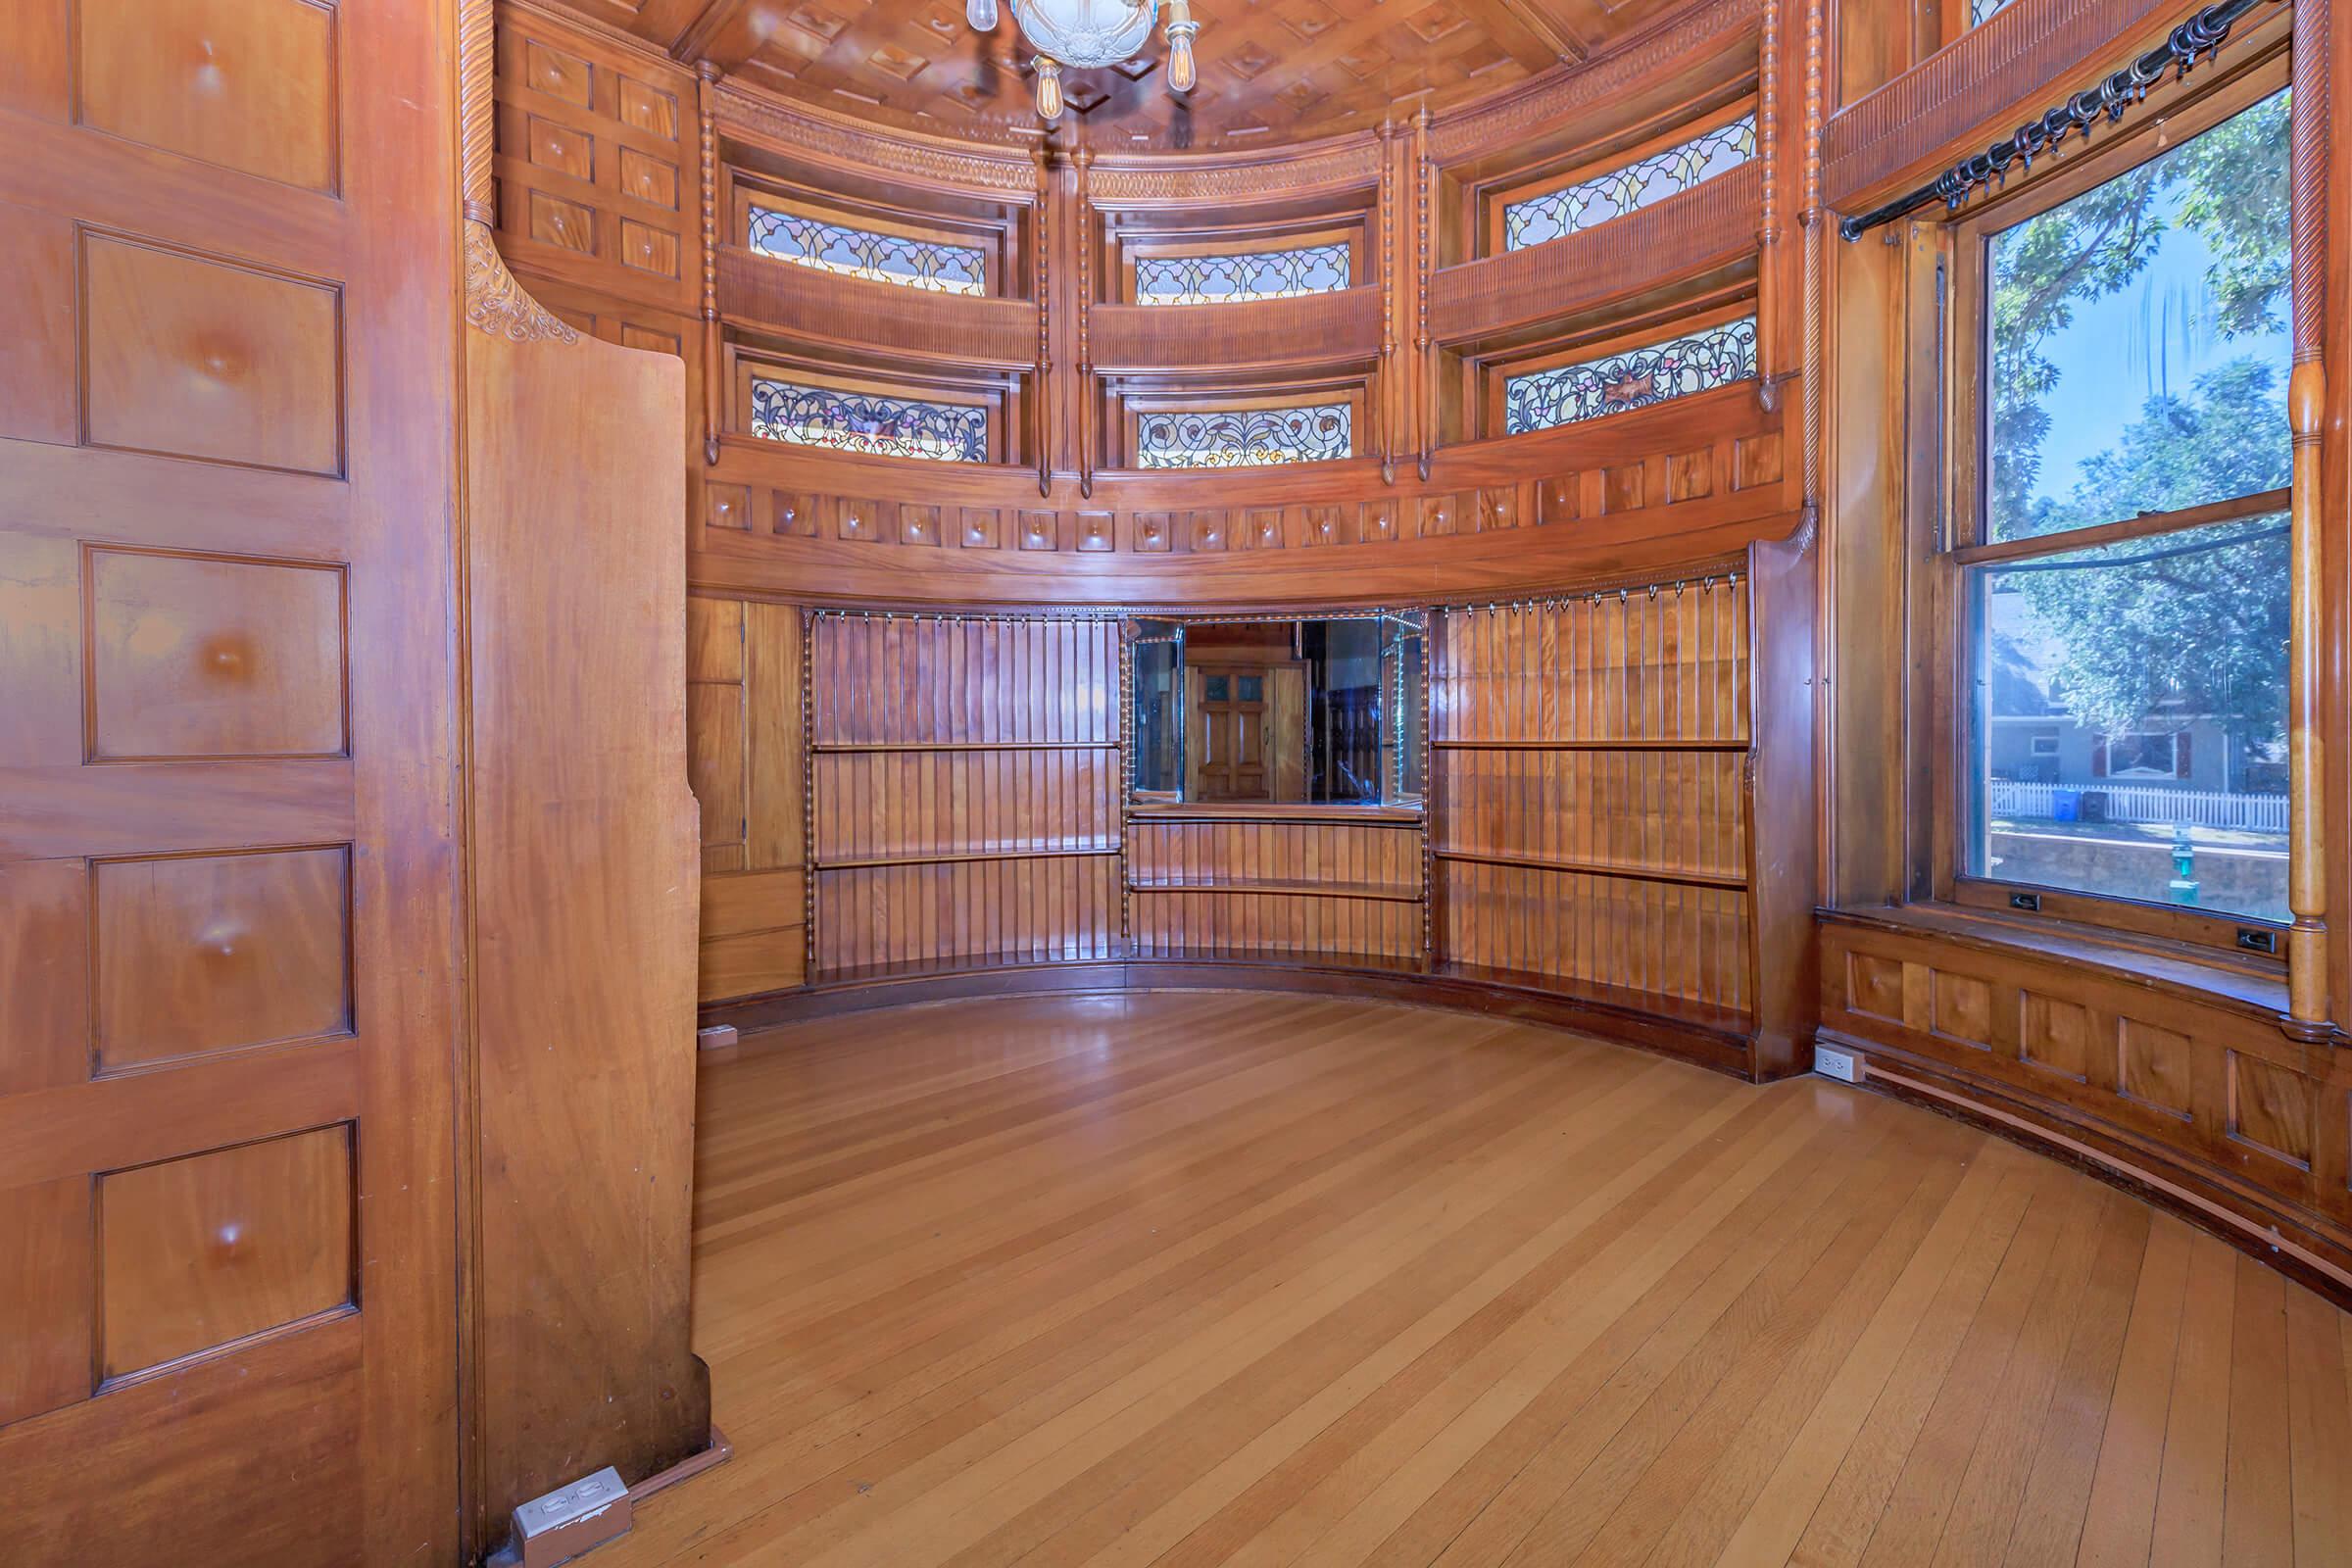 a room with hard wood floors and wooden cabinets